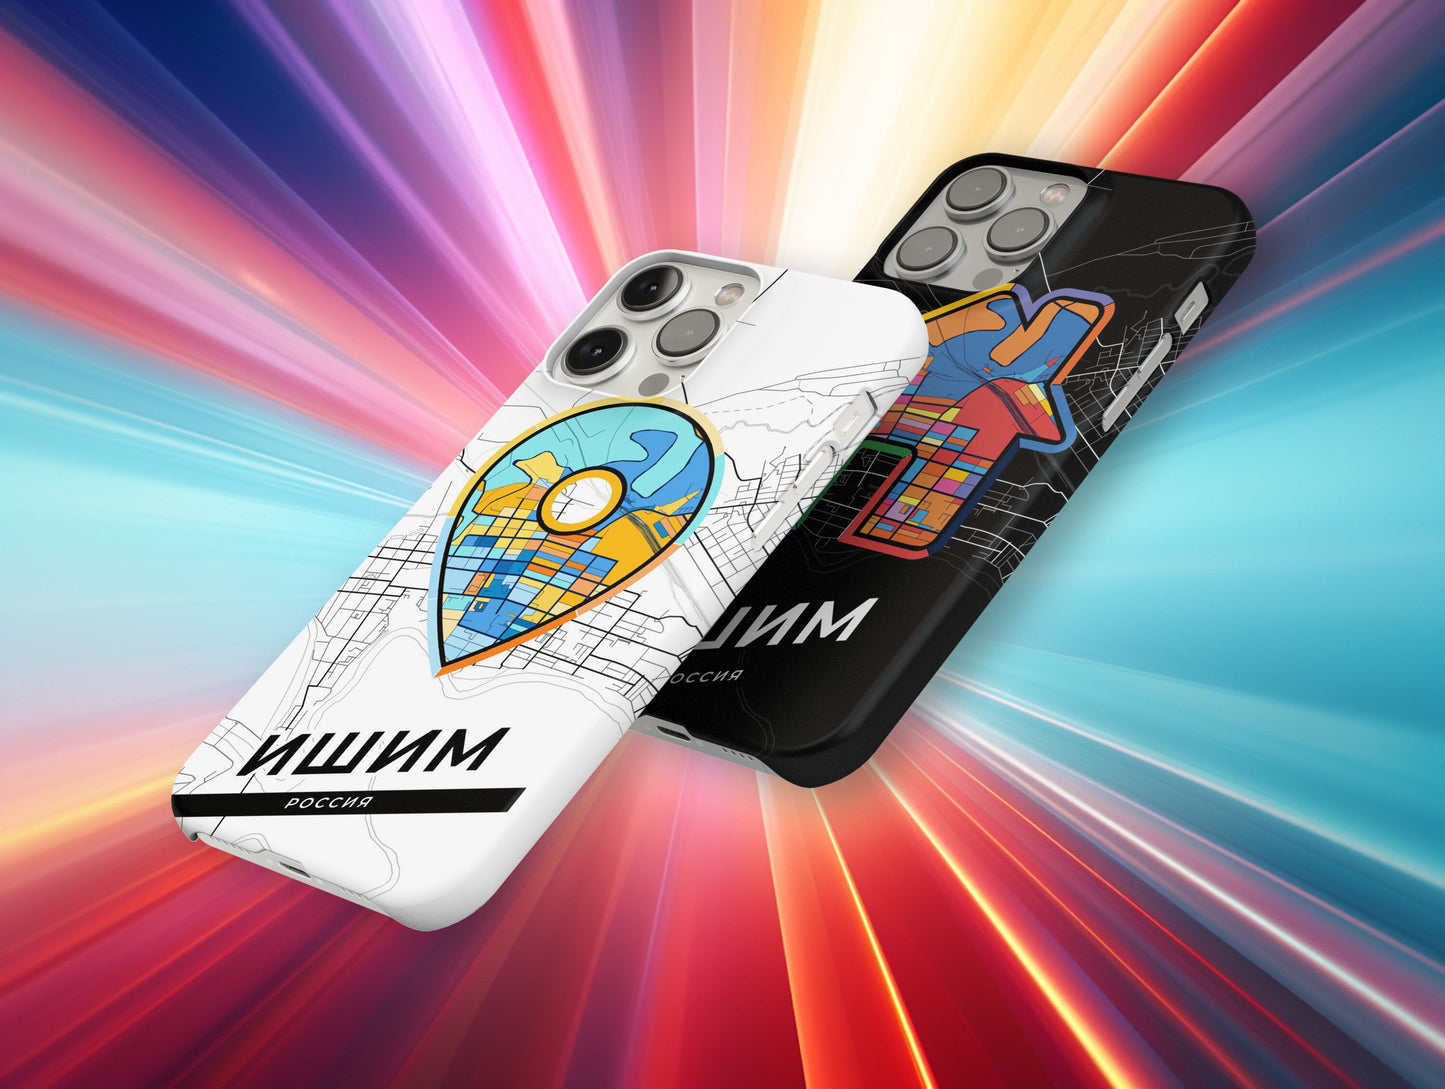 Ishim Russia slim phone case with colorful icon. Birthday, wedding or housewarming gift. Couple match cases.